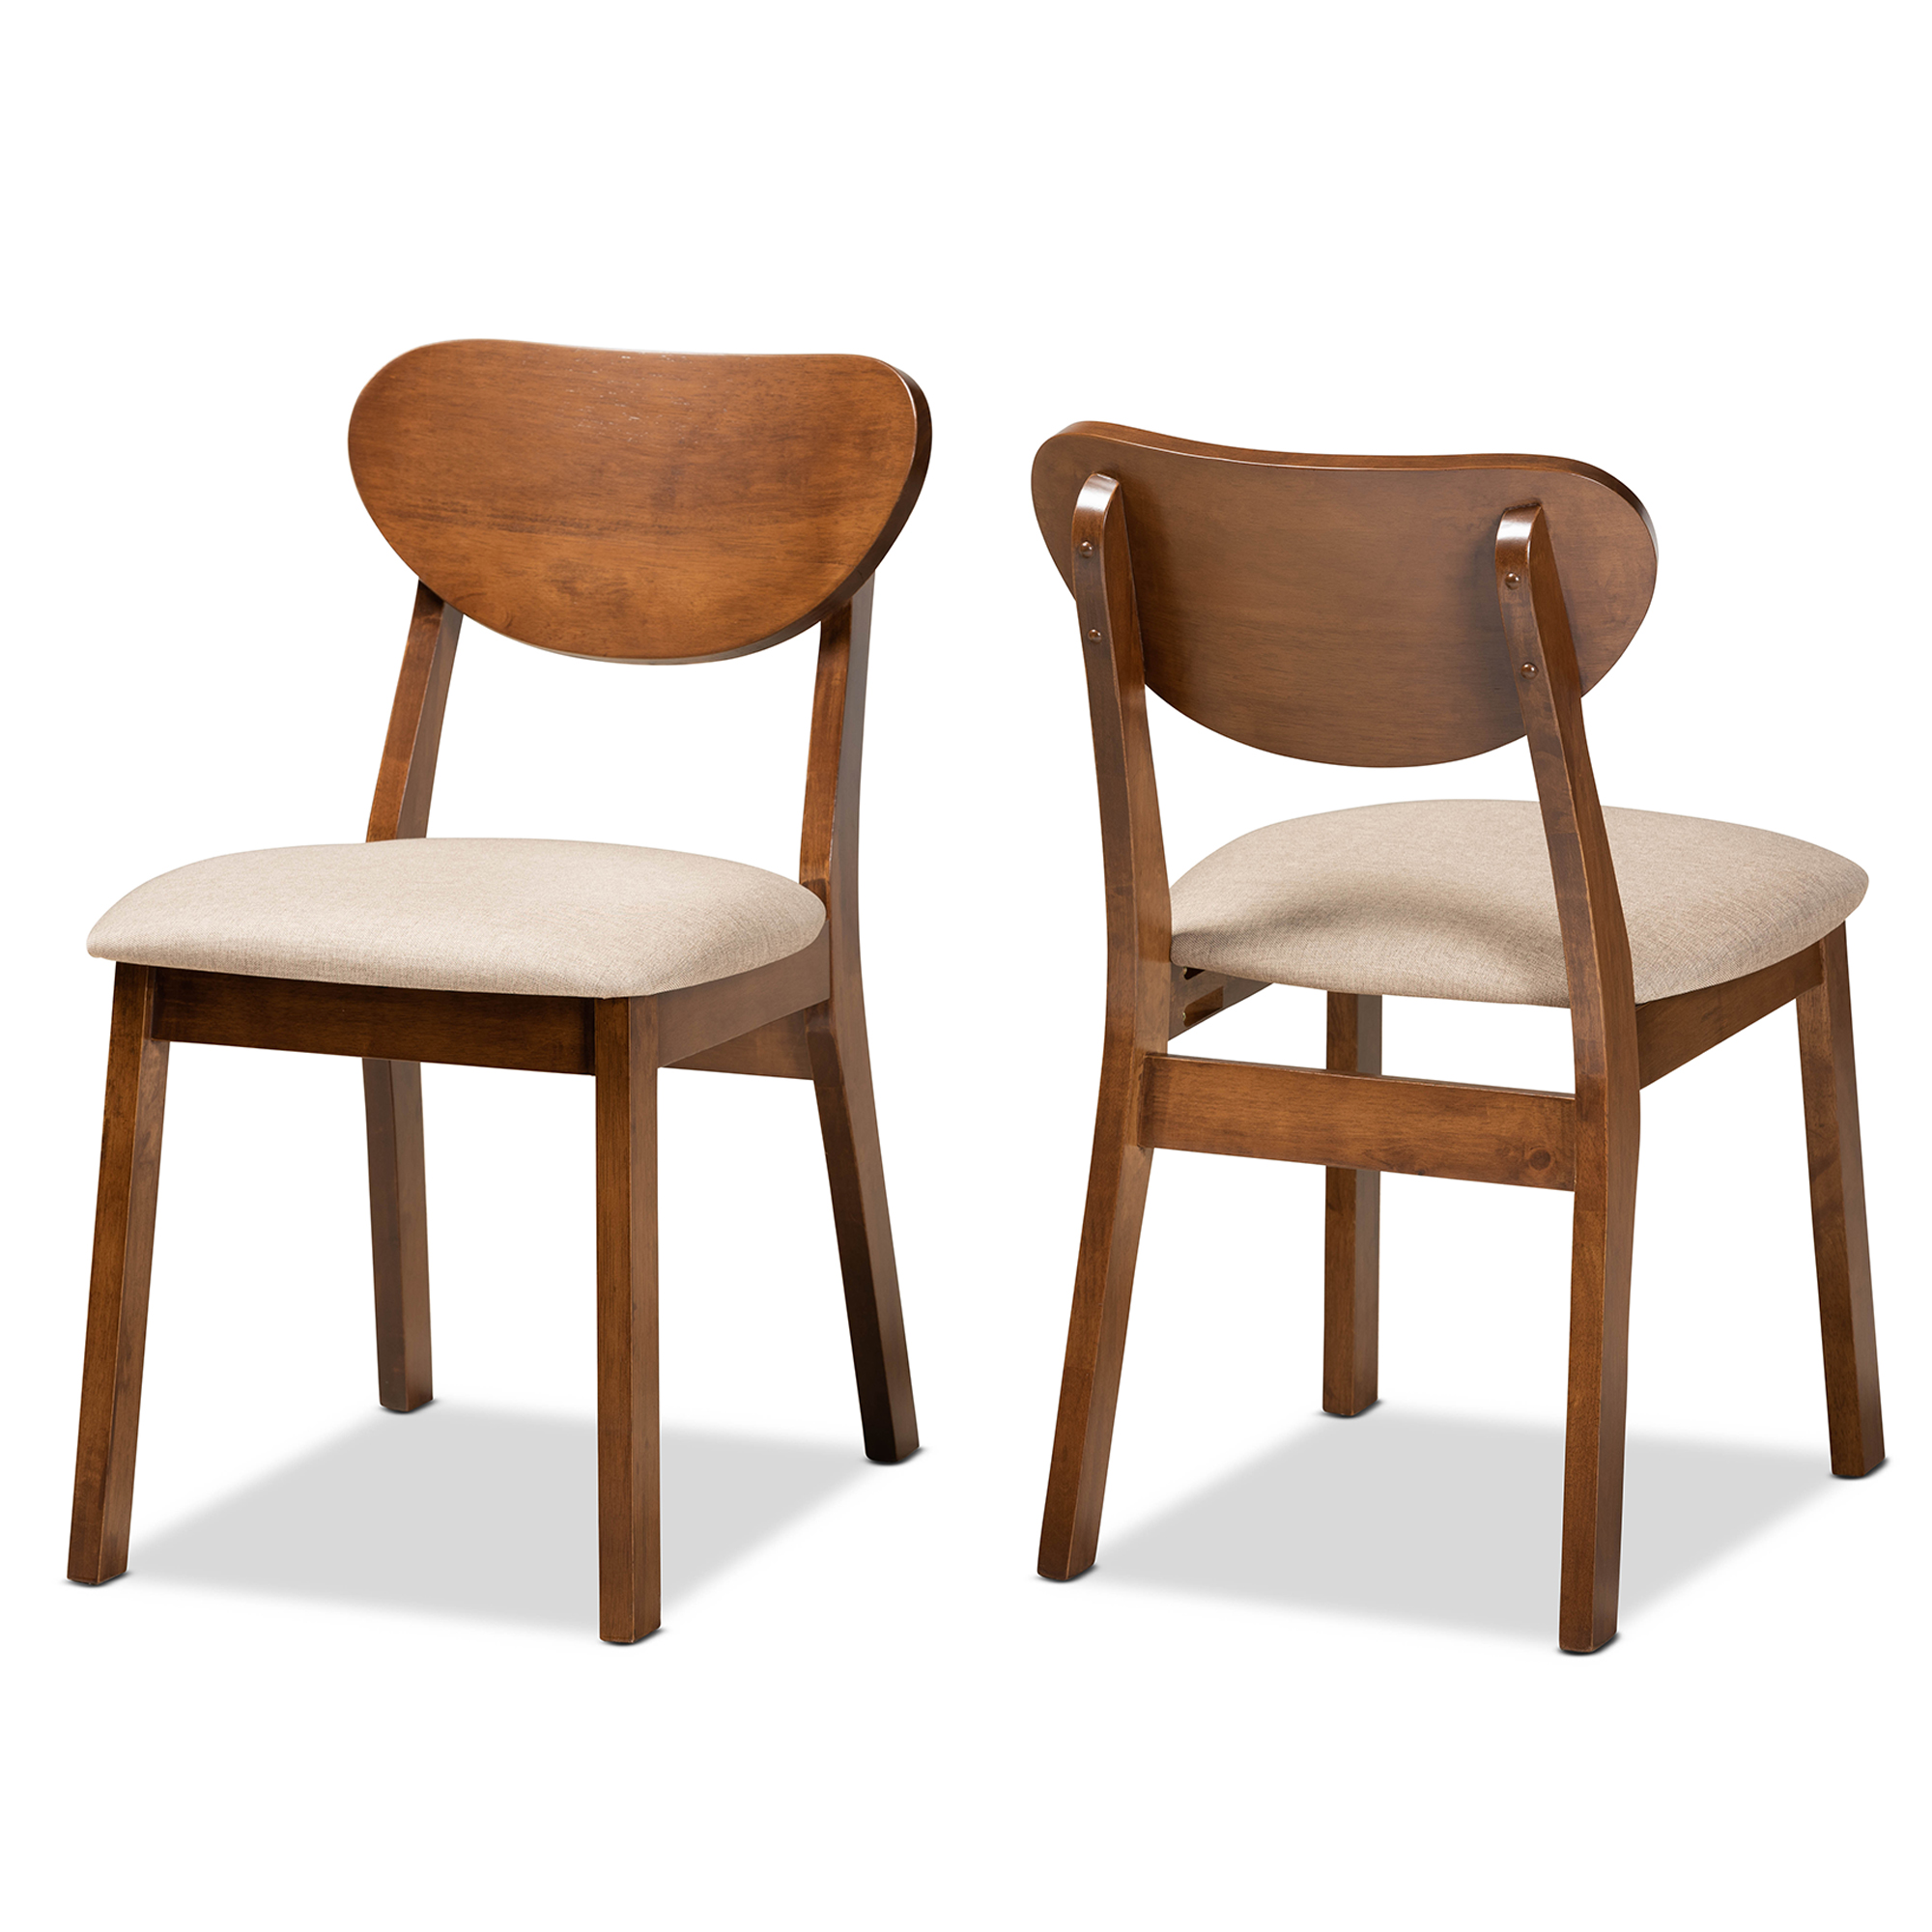 Baxton Studio Damara Mid-Century Modern Sand Fabric Upholstered and Walnut Brown Finished Wood 2-Piece Dining Chair Set Affordable modern furniture in Chicago, classic dining room furniture, modern dining chairs, cheap dining chairs